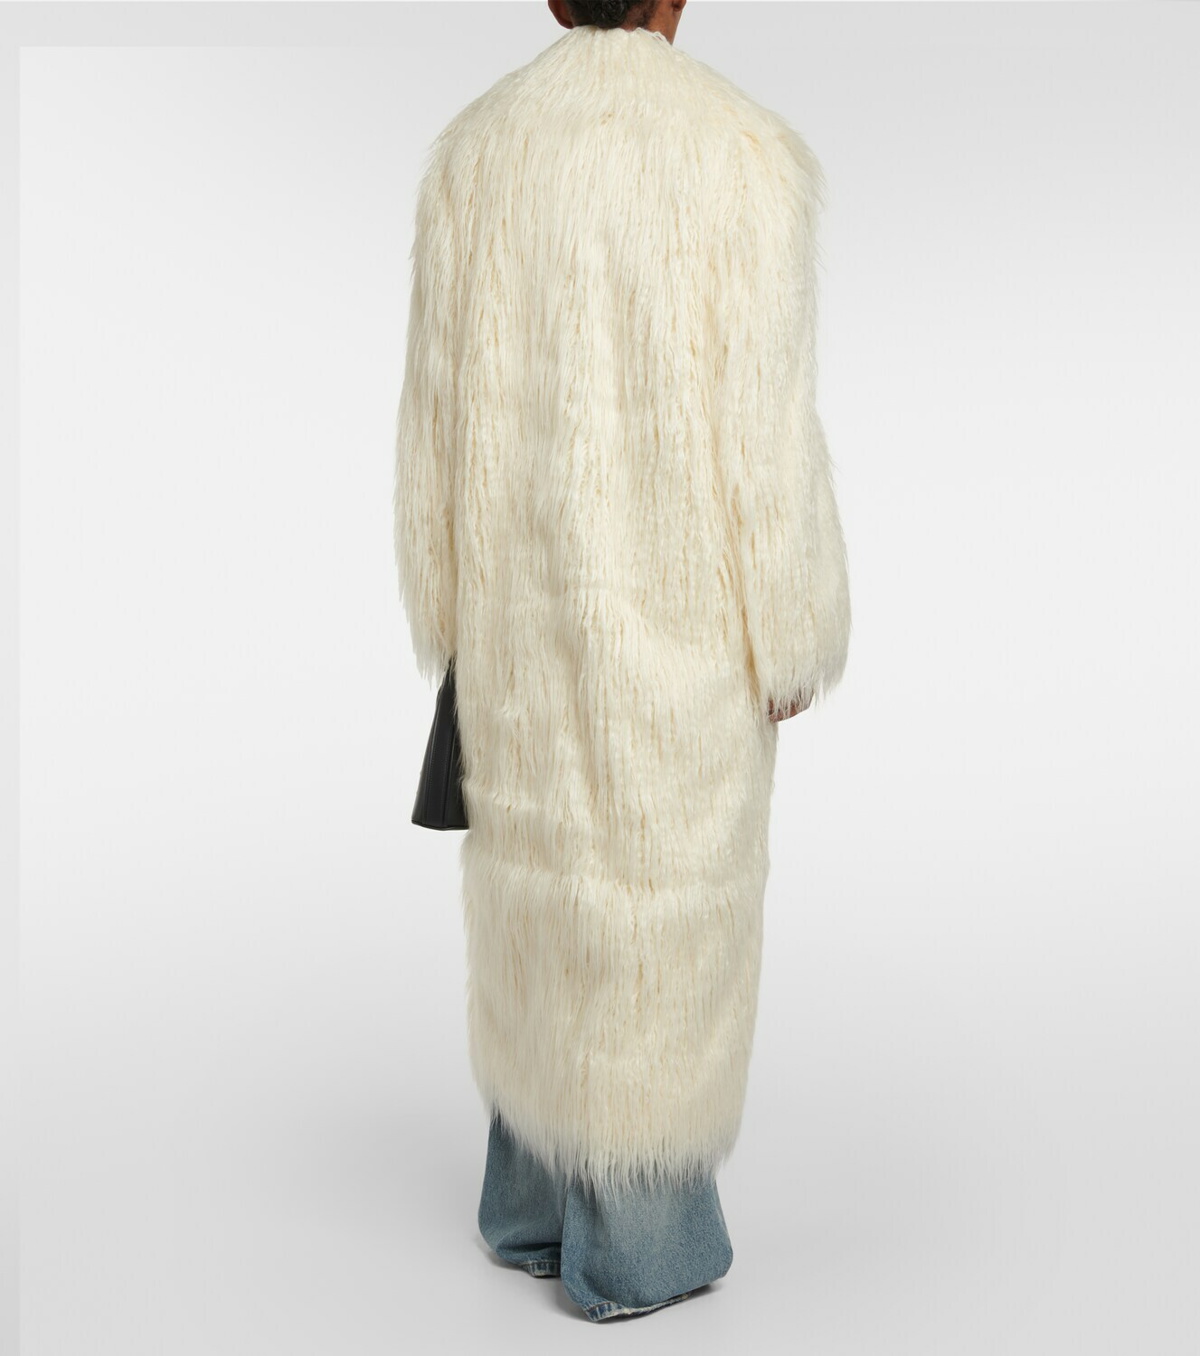 Nicole oversized faux fur coat in white - The Frankie Shop